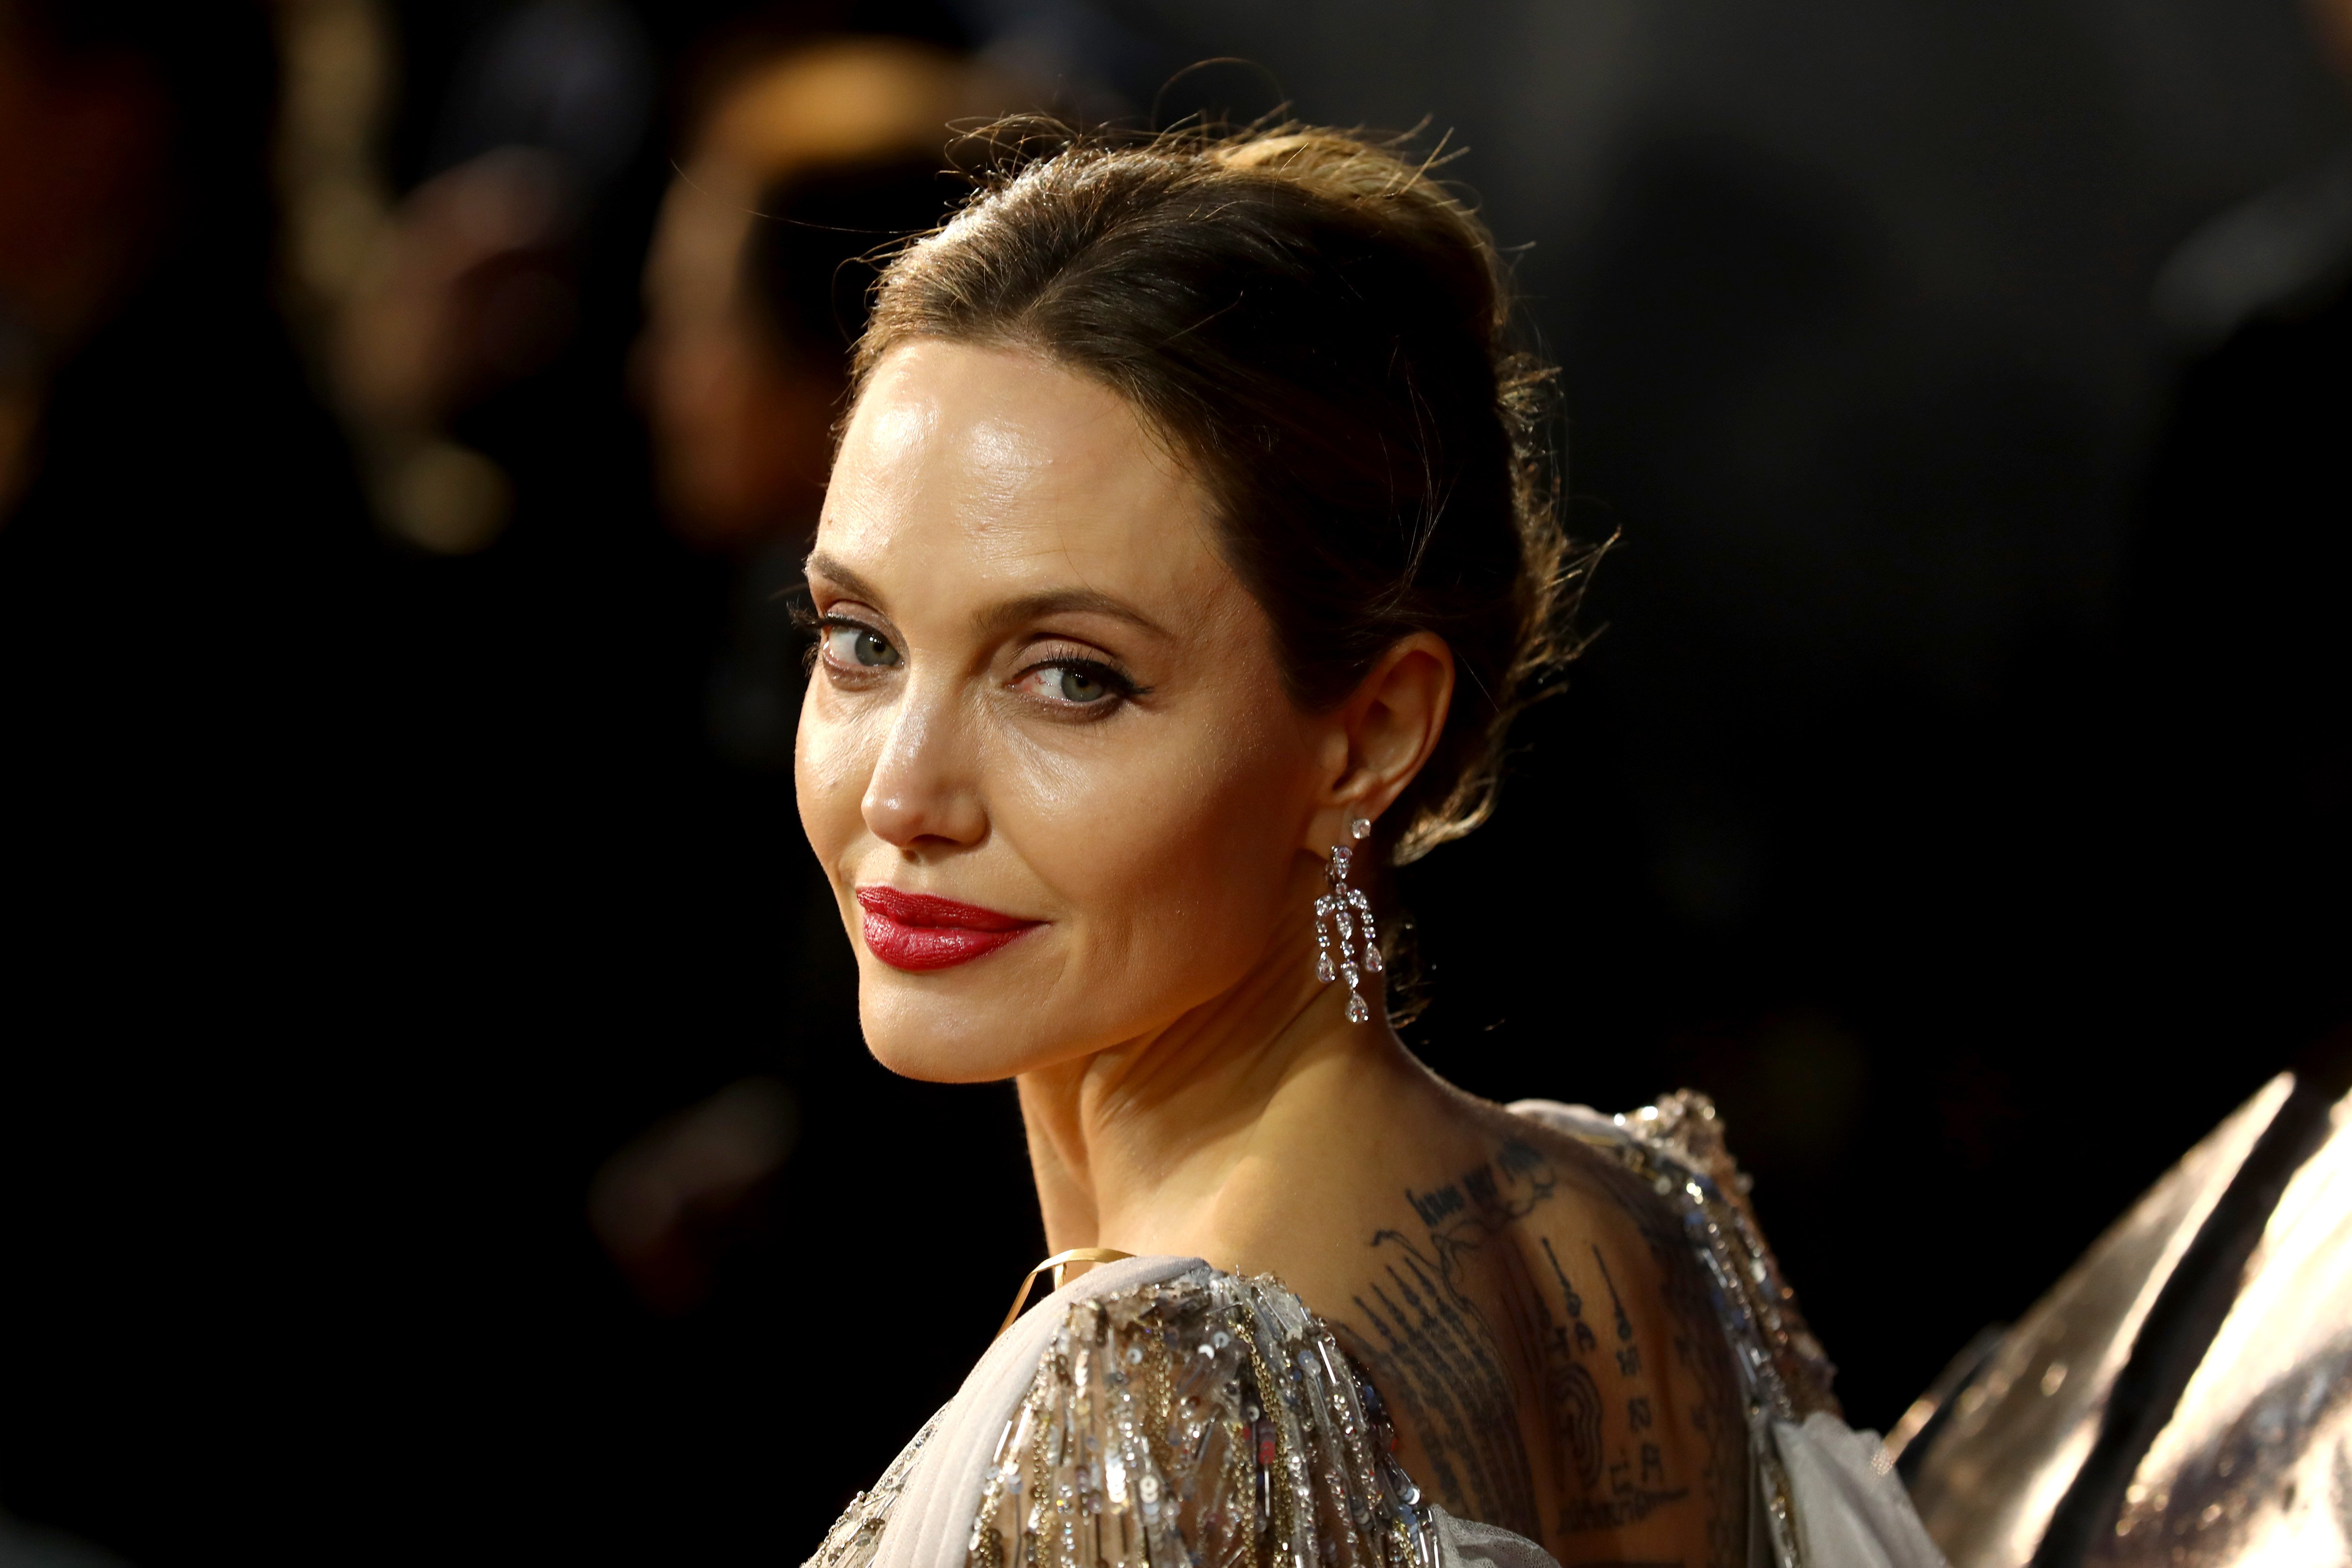 Angelina Jolie attends the premiere of "Maleficent: Mistress of Evil" in London, England on October 9, 2019 | Photo: Getty Images